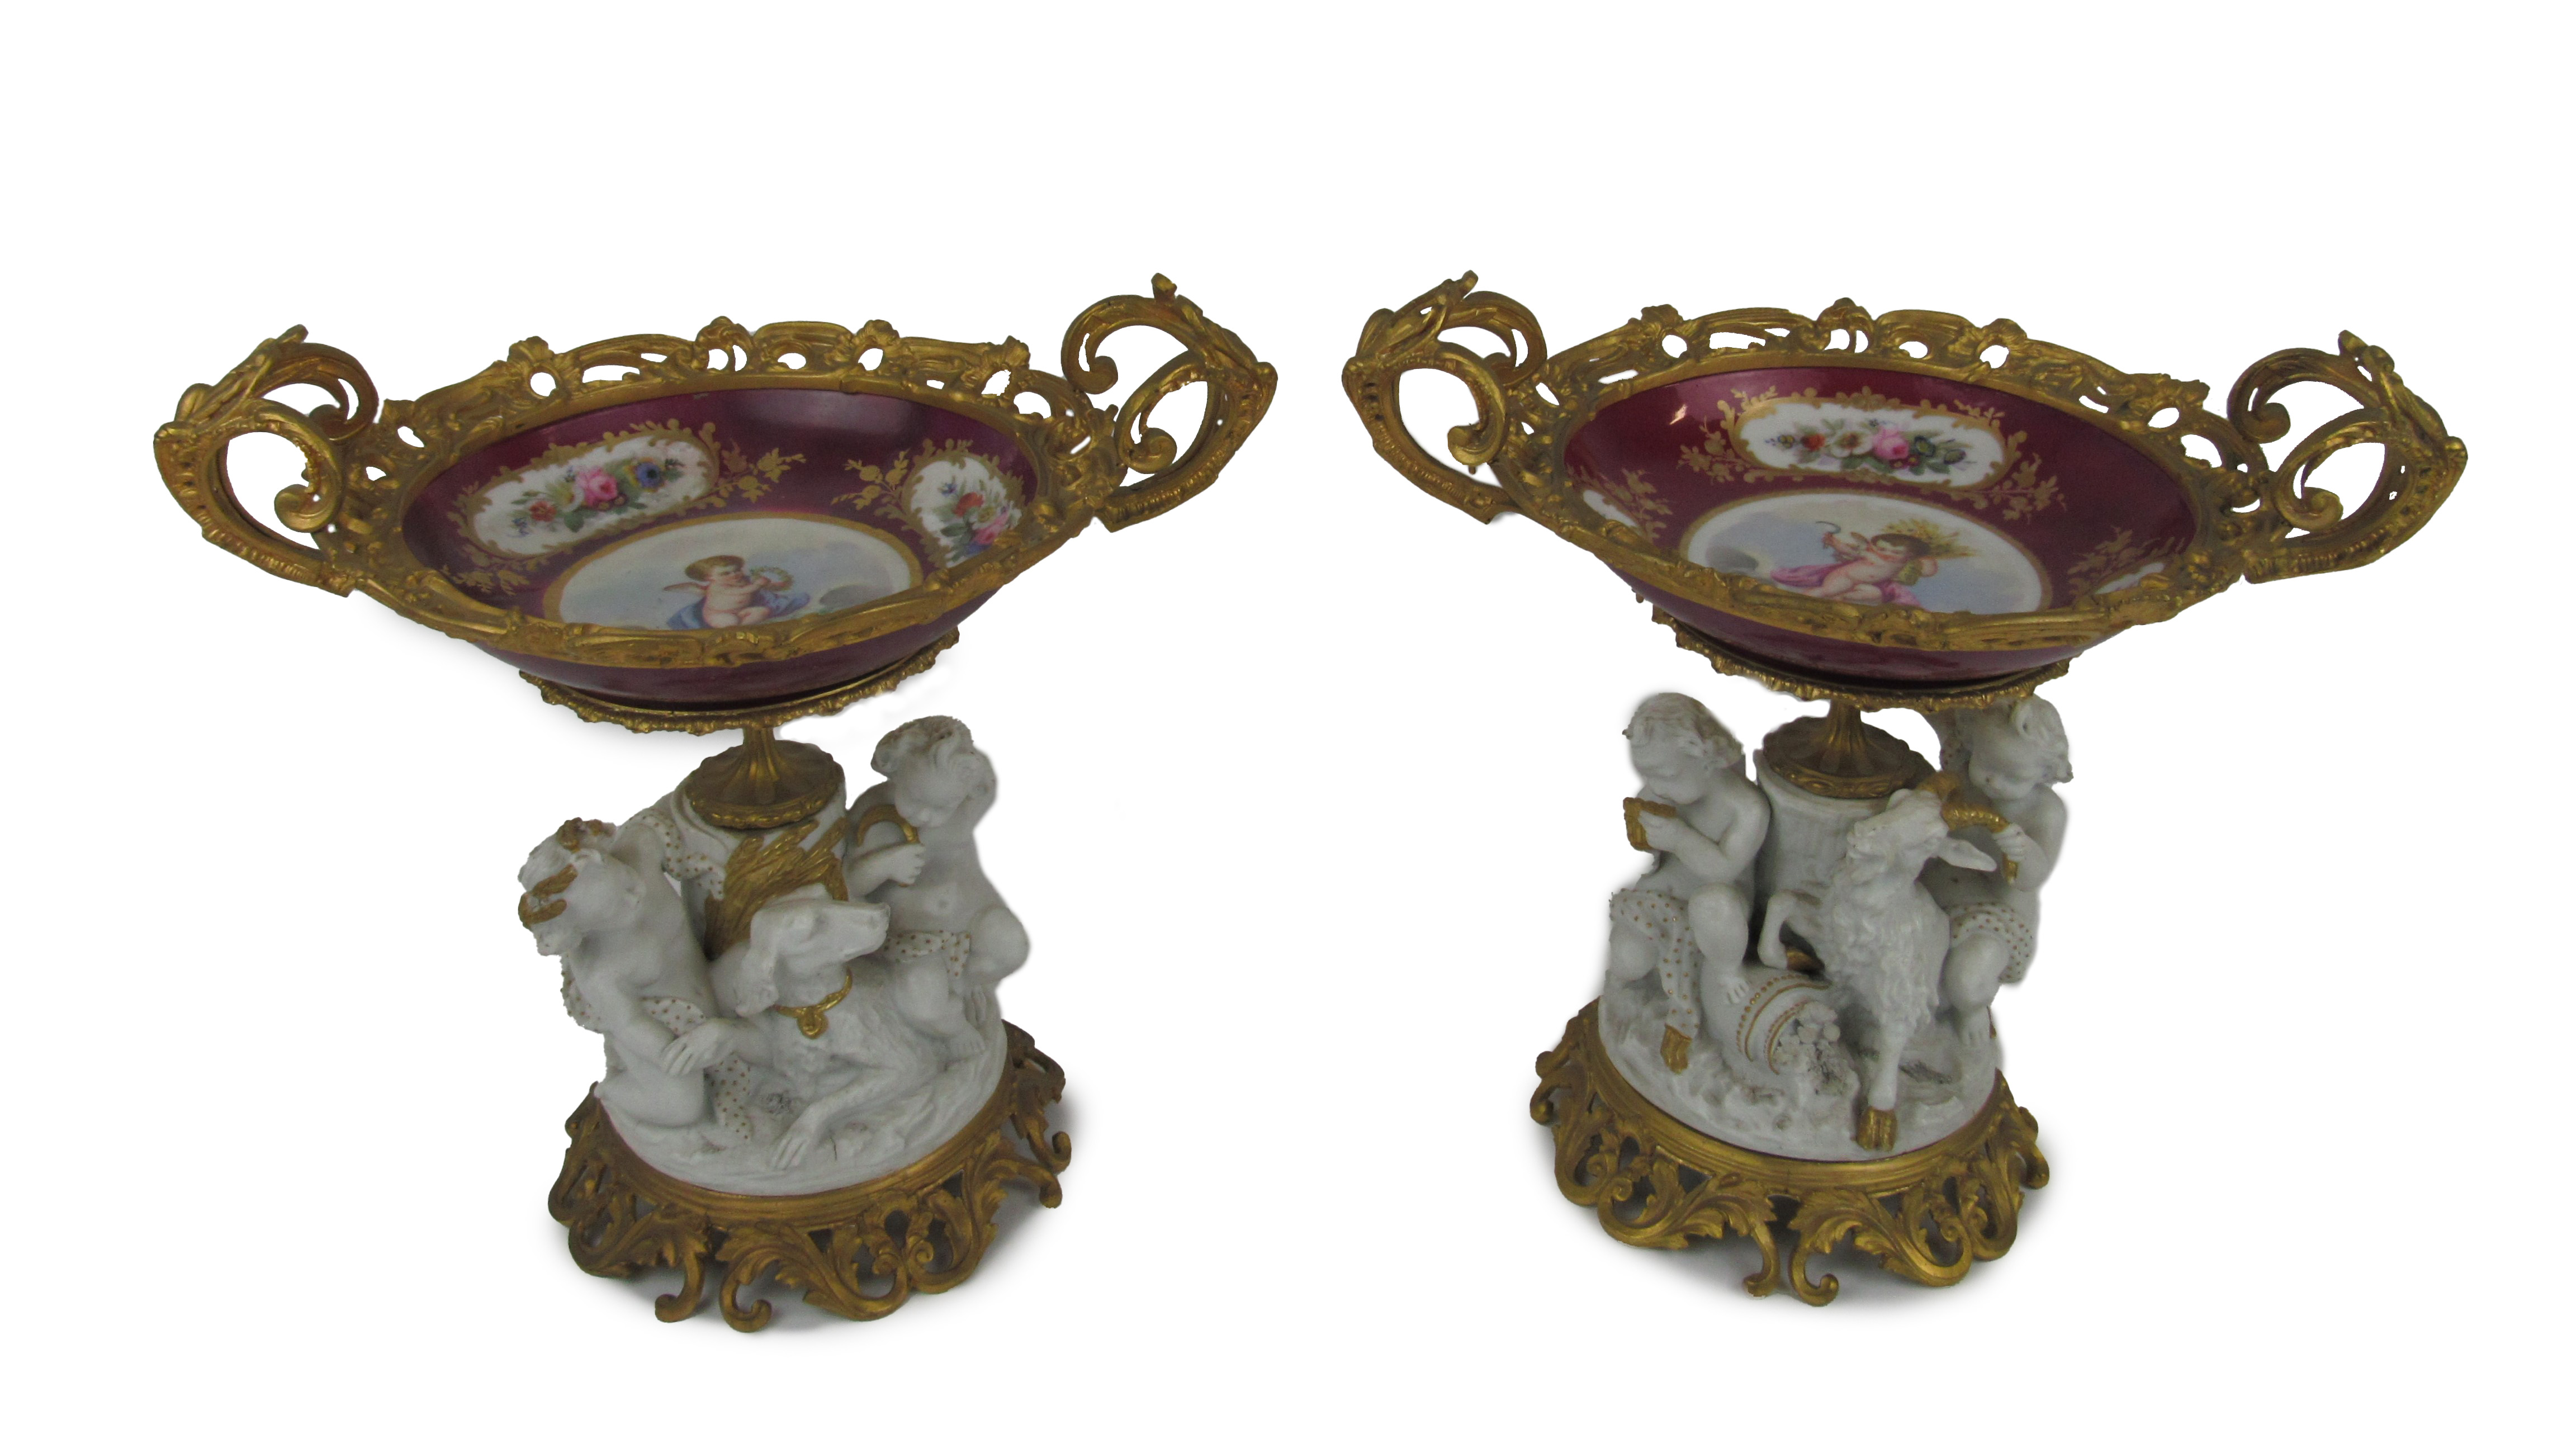 A pair of attractive ormolu mounted and hand painted porcelain Centerpiece's, decorated with flowers